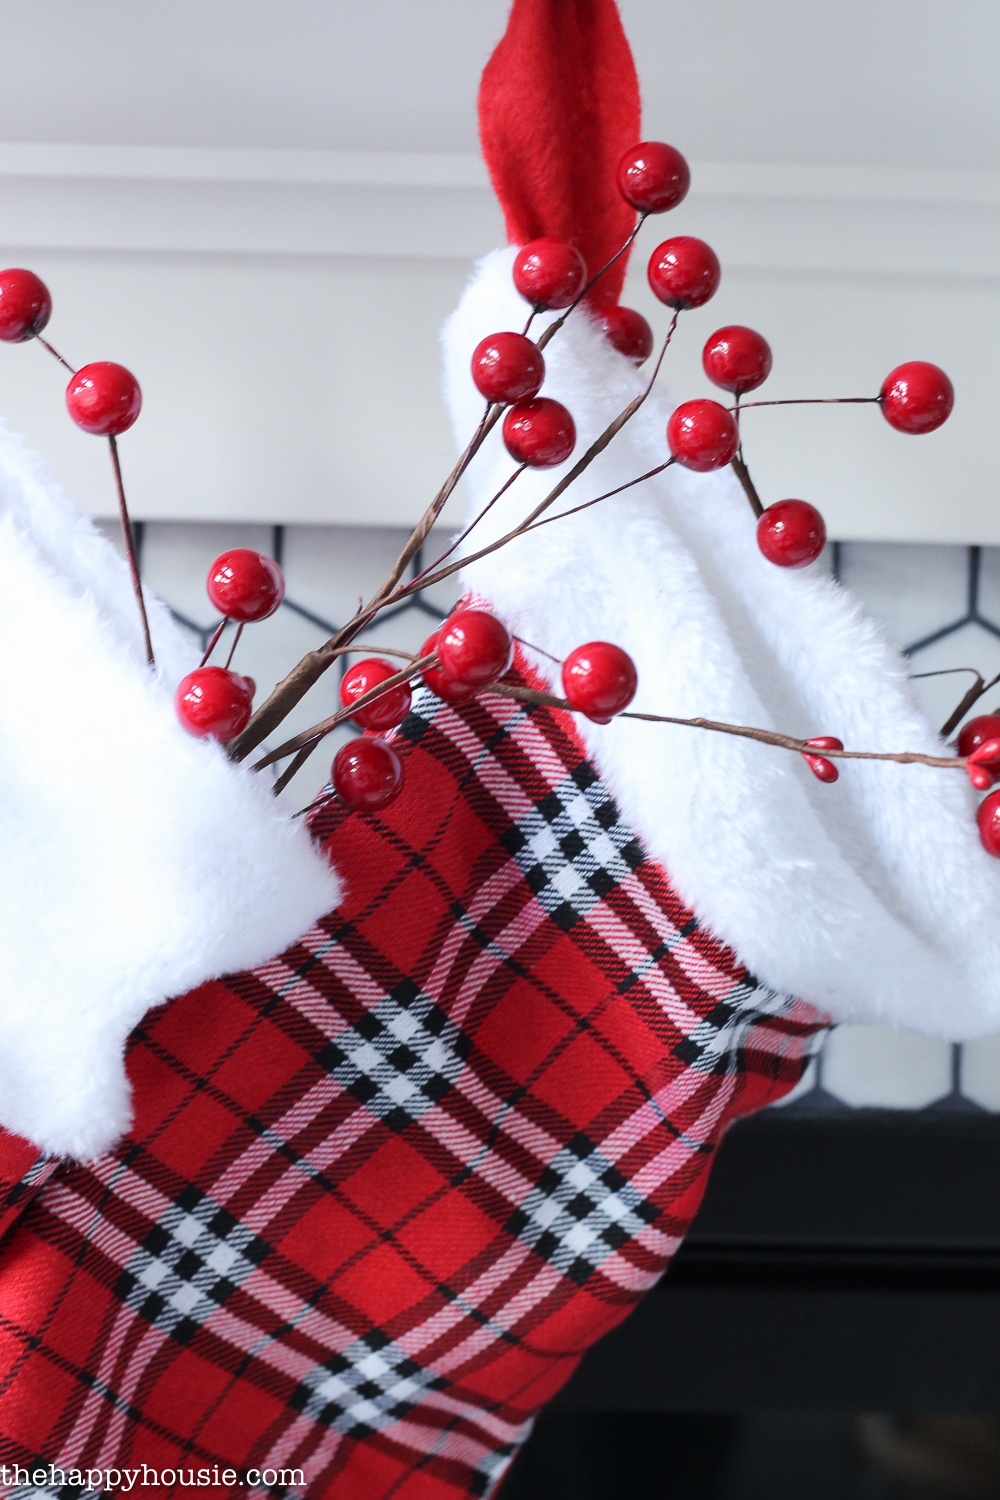 Up close pictures of the red berries on the stocking.